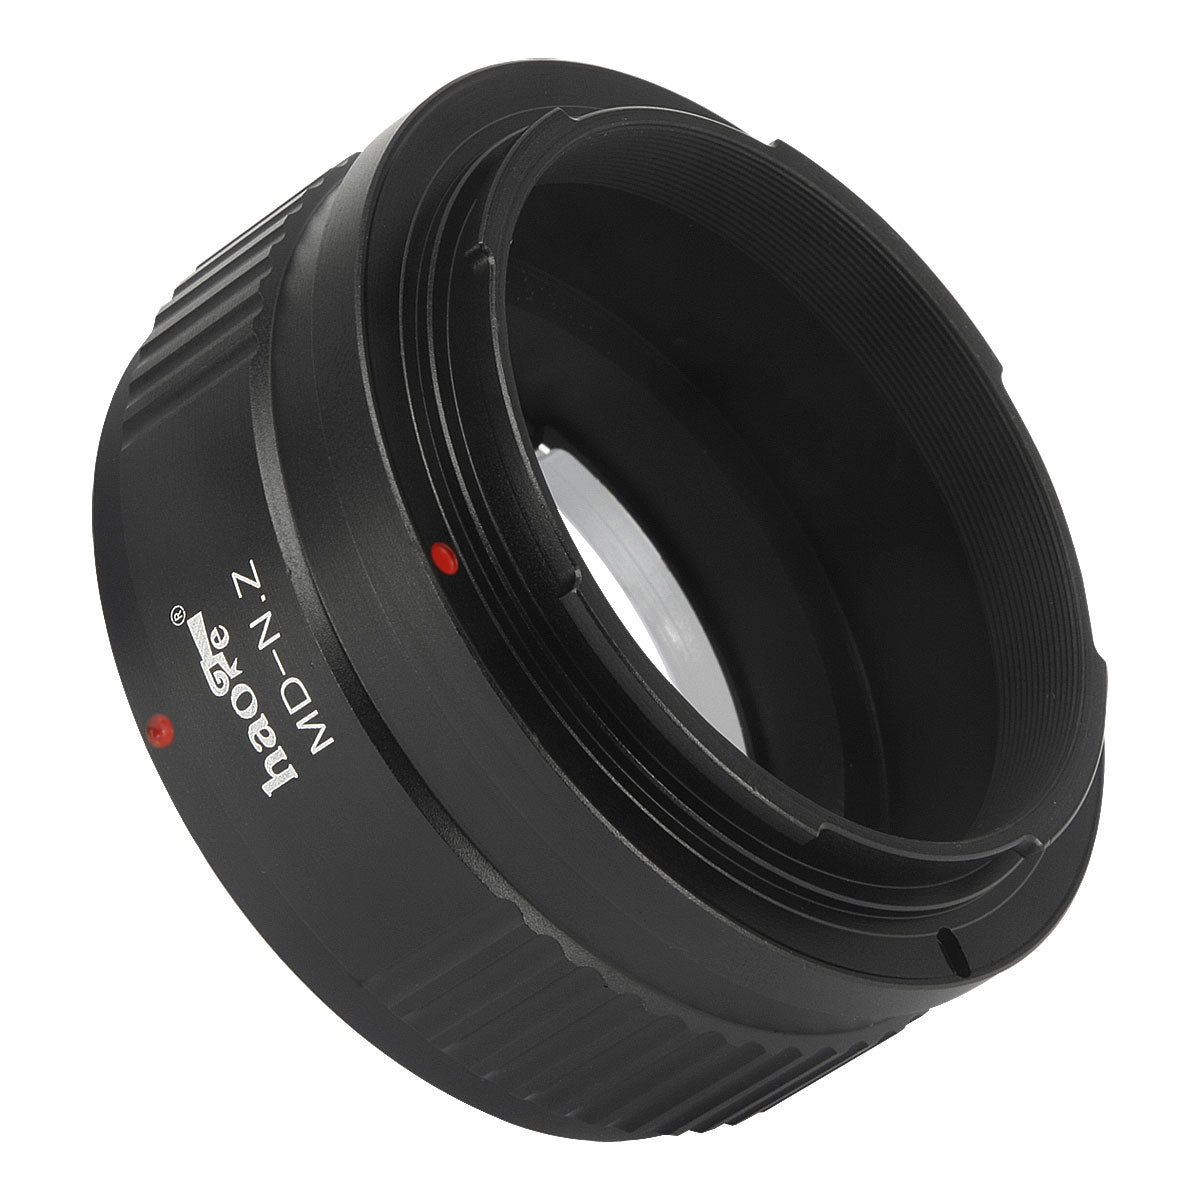 Haoge Manual Lens Mount Adapter for Minolta MD Lens to Nikon Z Mount Camera Such as Z6 Z7